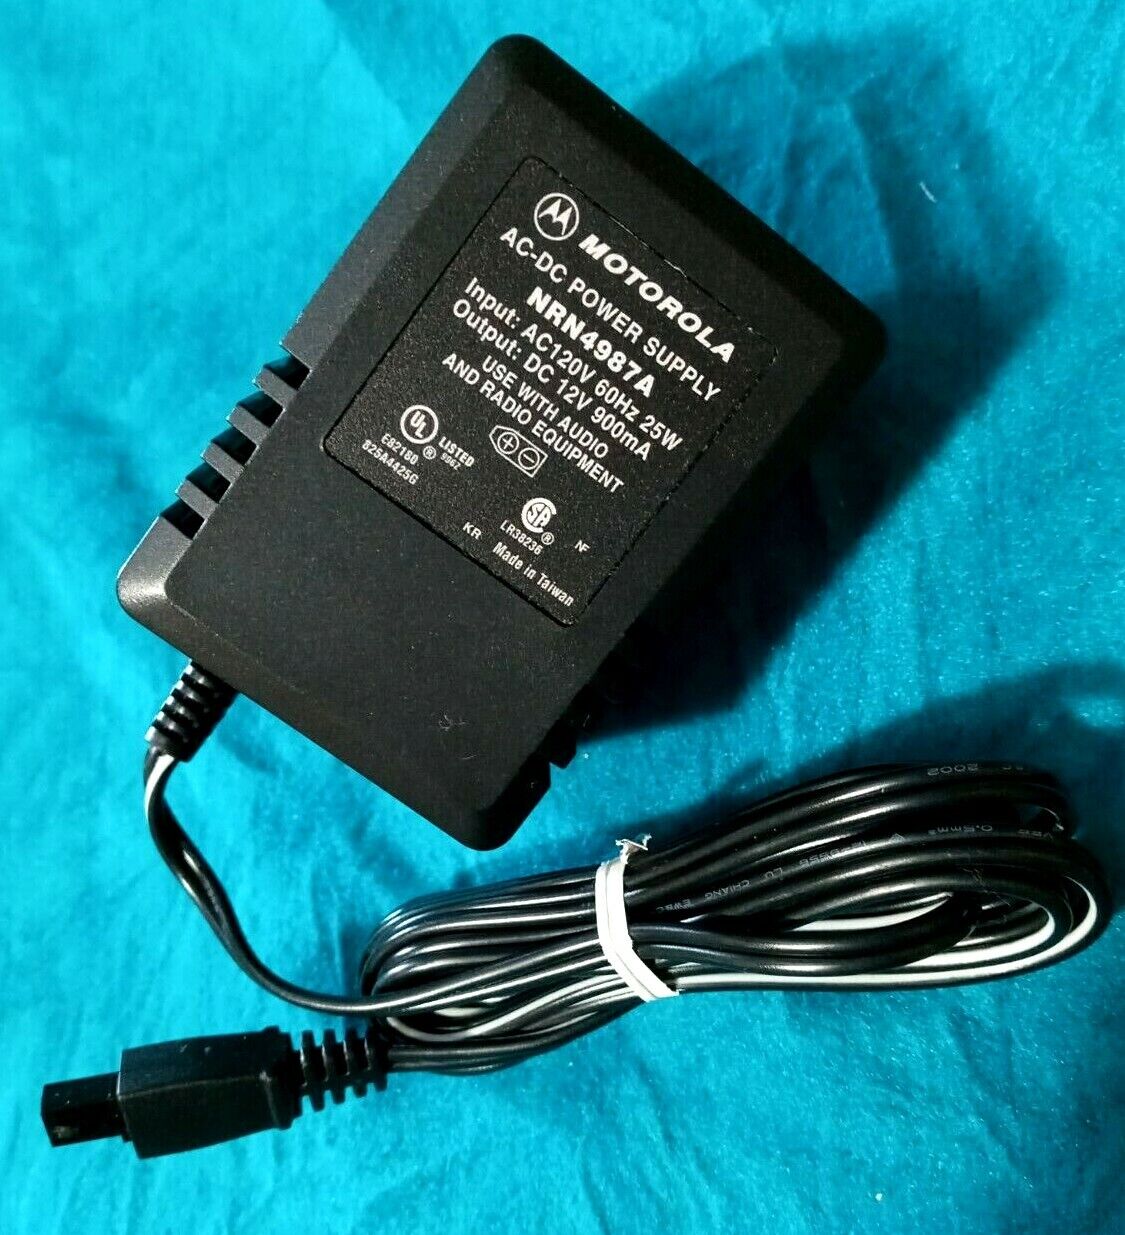 Motorola POWER SUPPLY - NRN4987A for Minitor II III IV amplified charger base